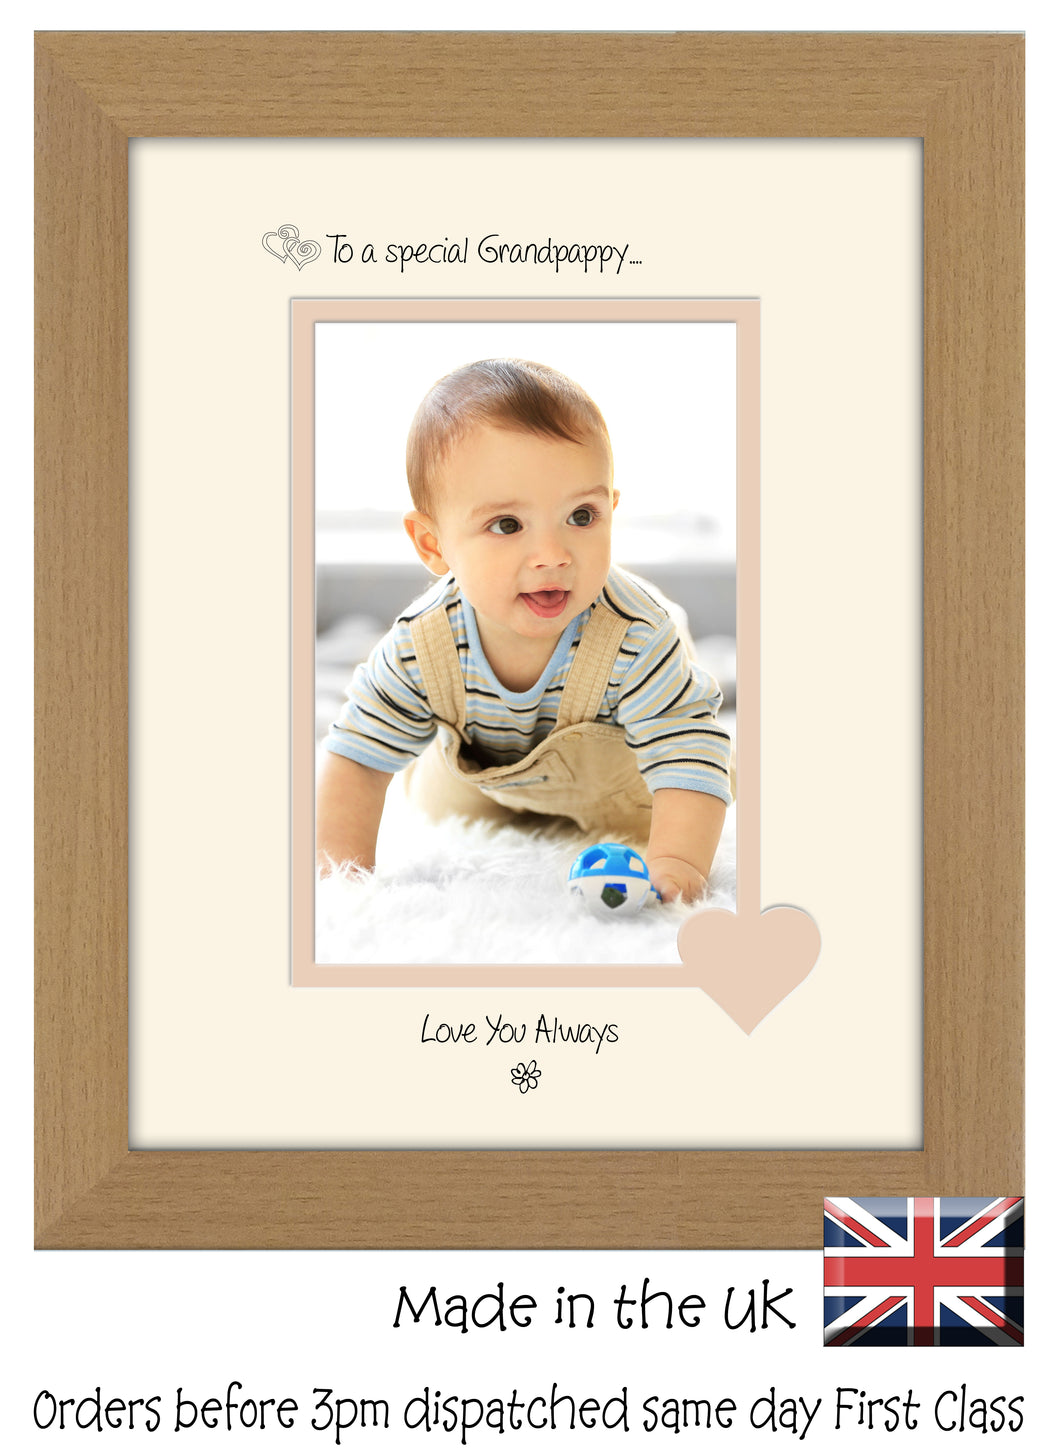 Grandpappy Photo Frame - To a Special Grandpappy ... Love you Always Portrait photo frame 6